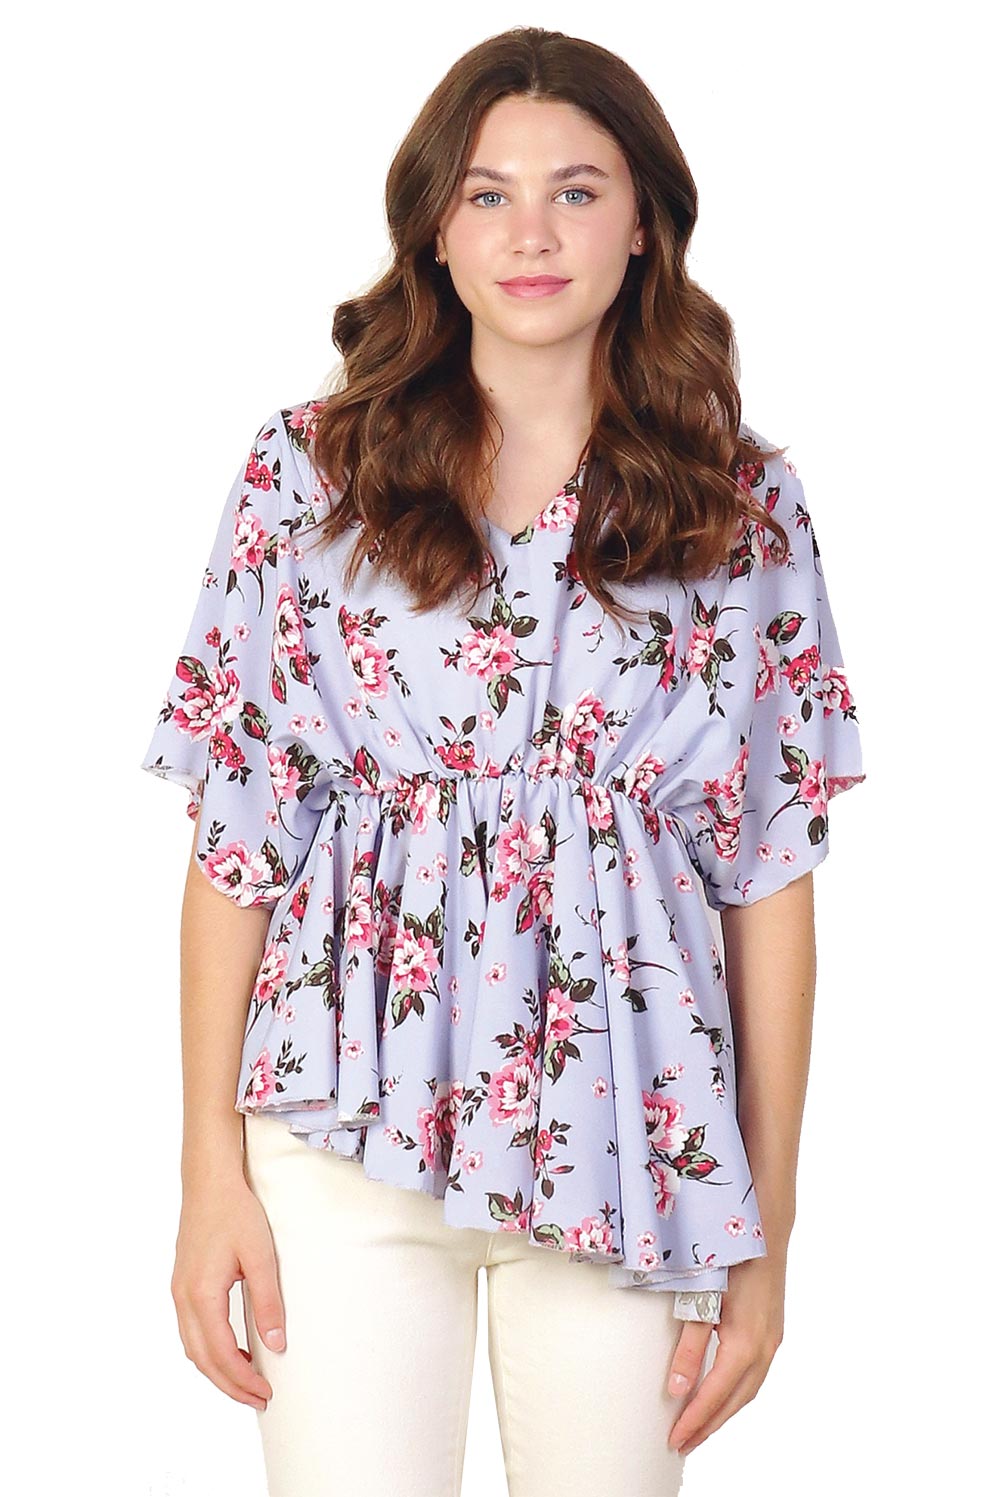 Asymmetrical Stretchy Floral Top - Periwinkle/Pink